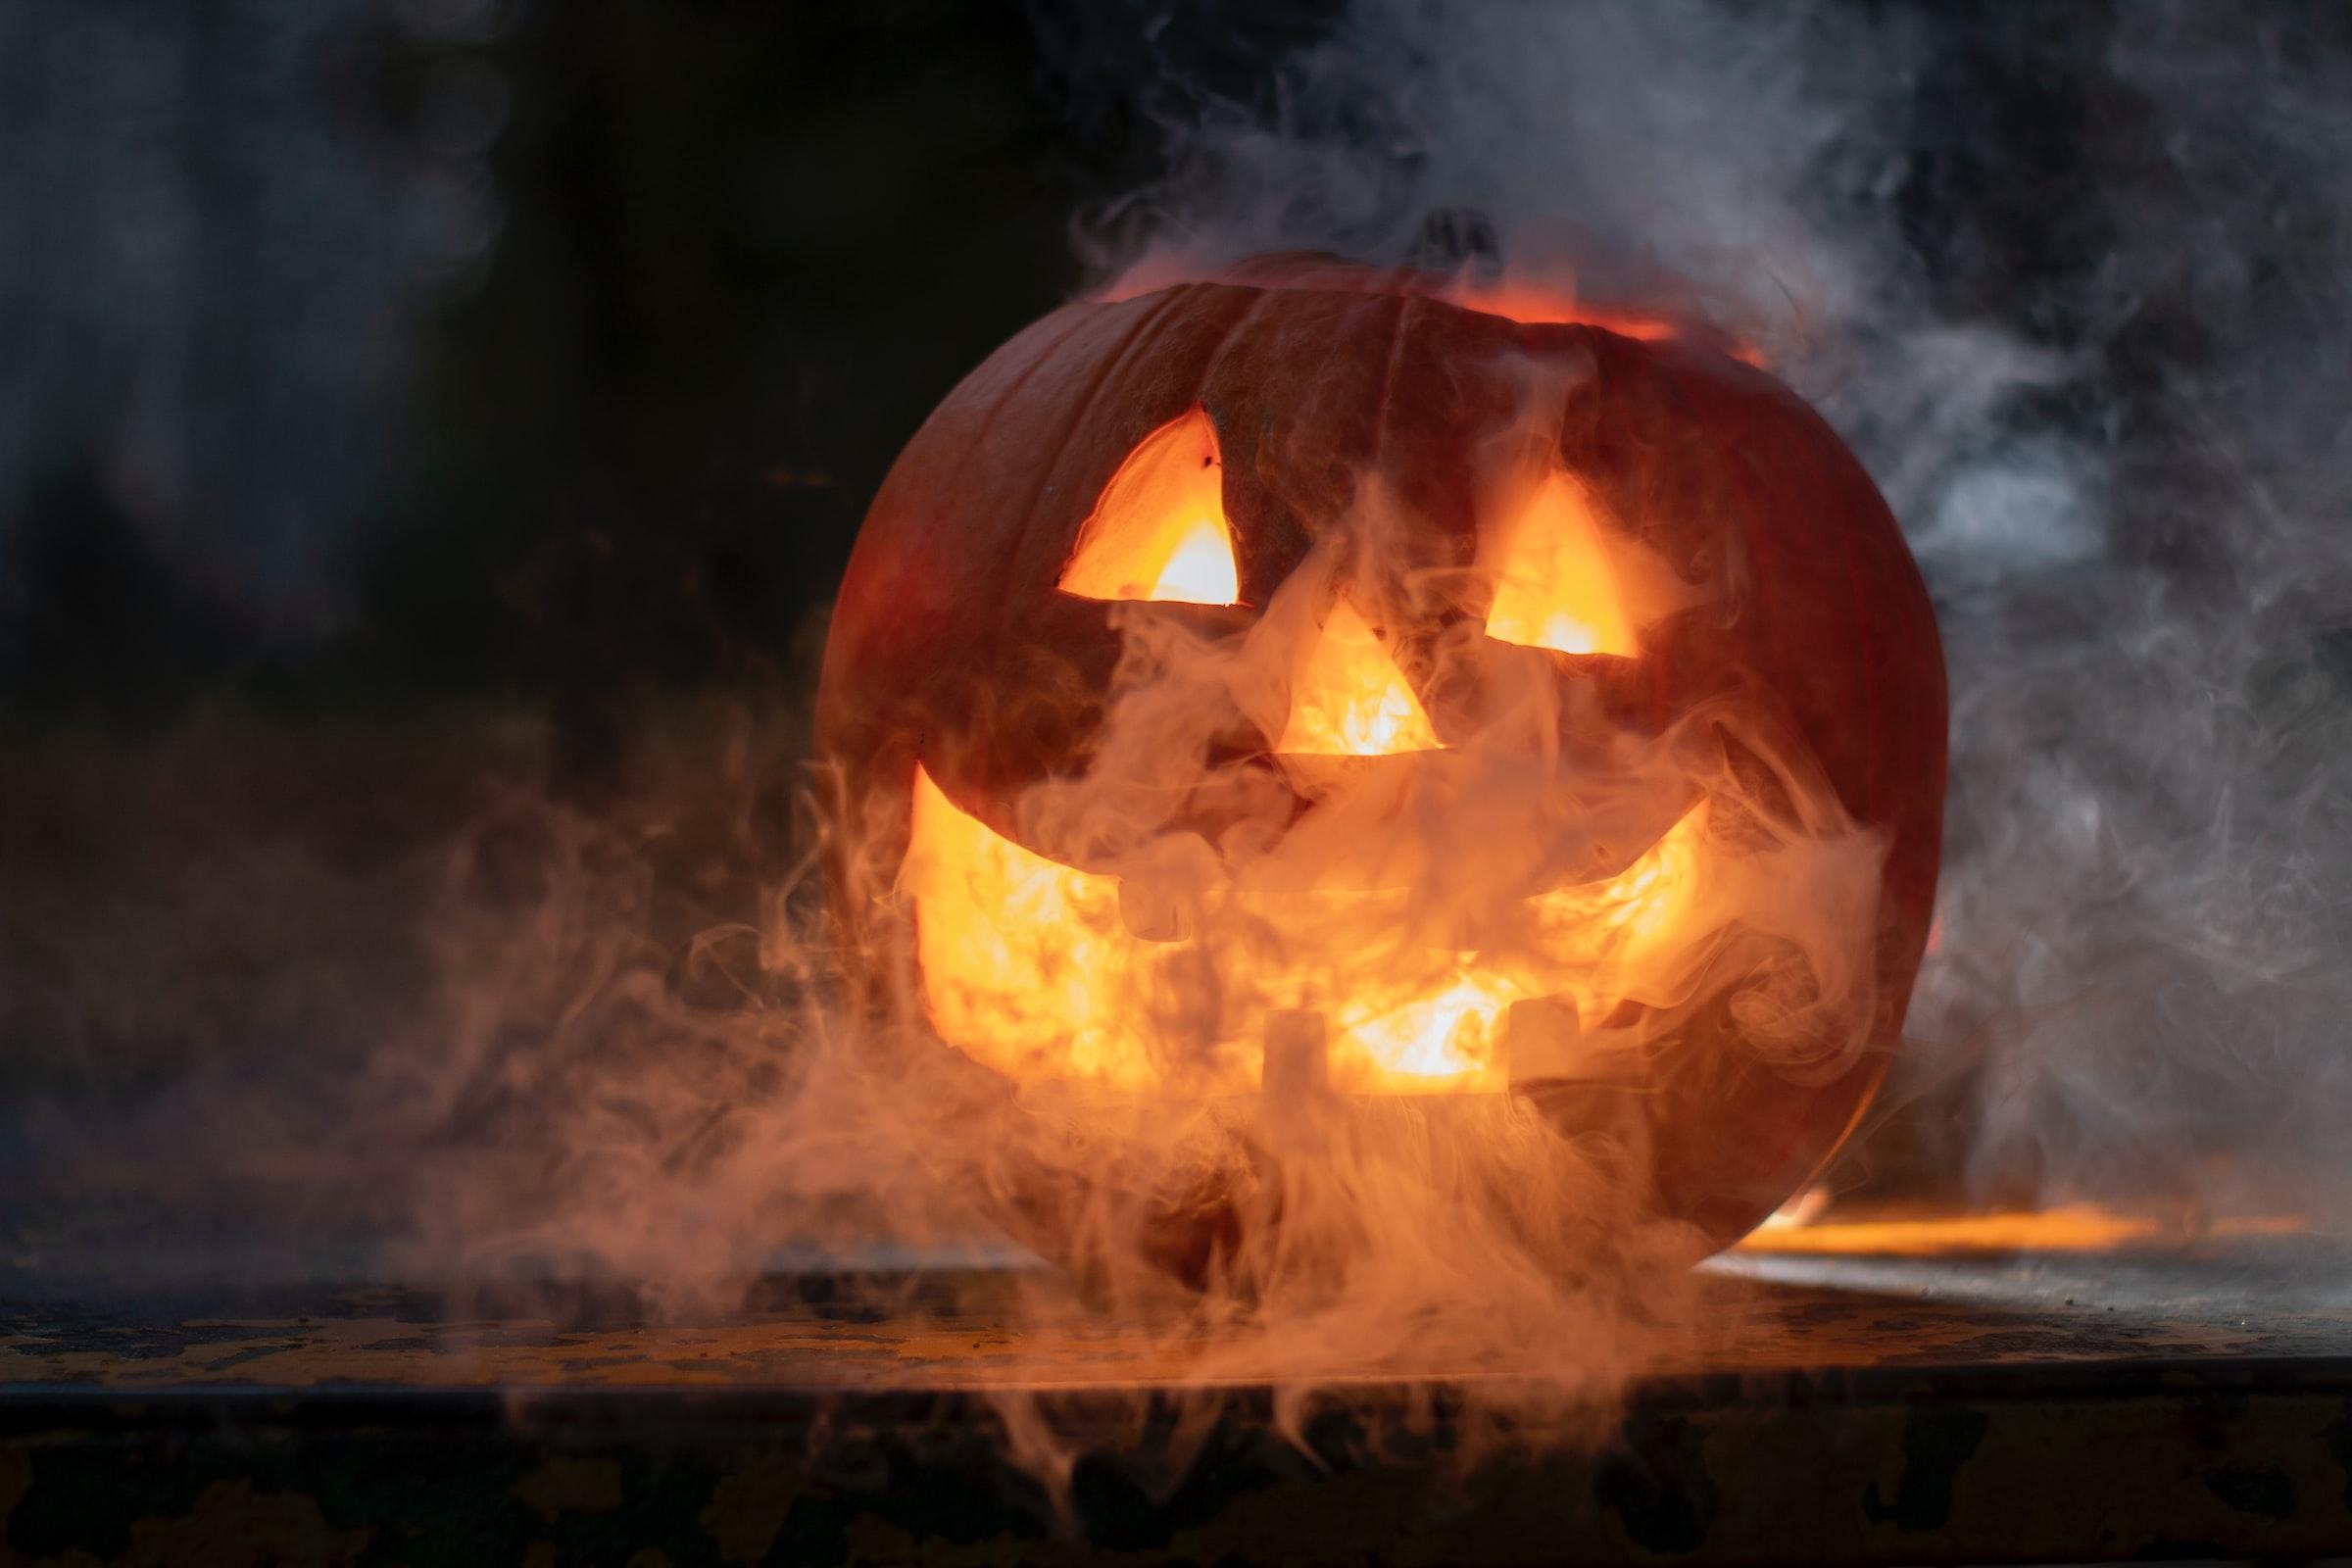 The best spooky places to visit this Halloween